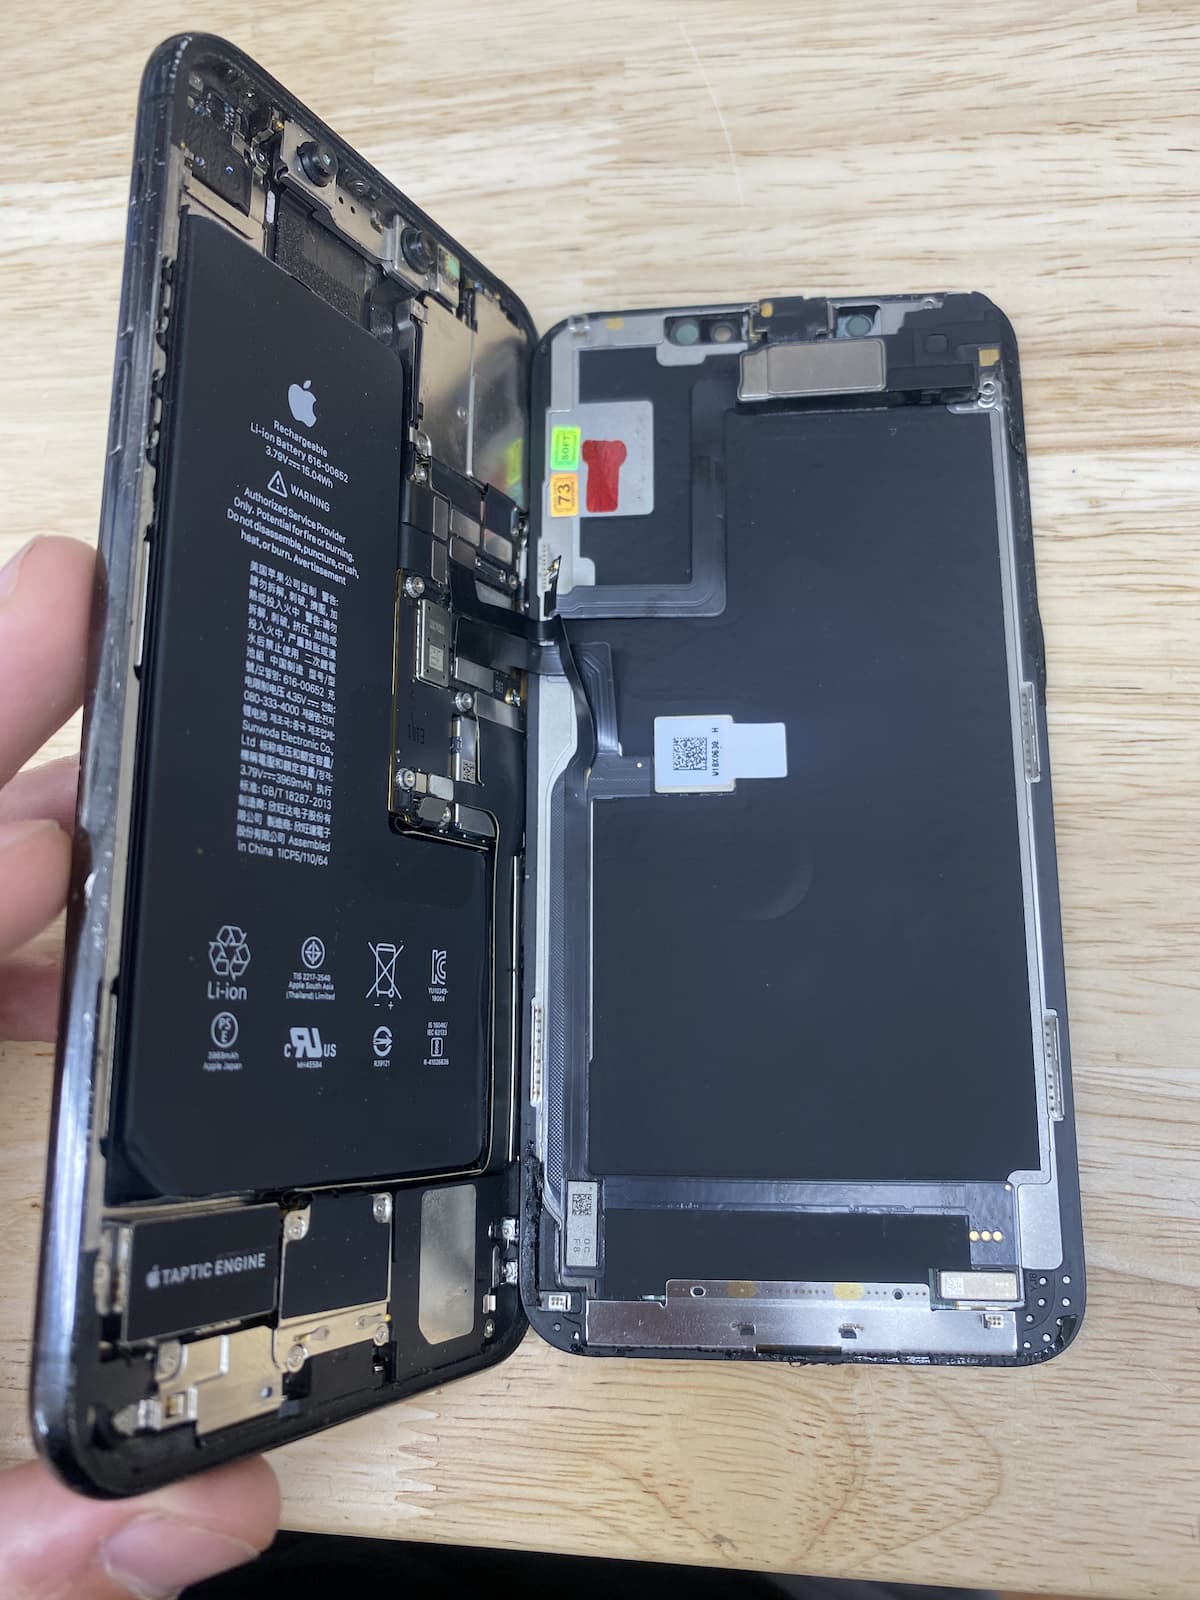 iPhone 11 Pro Max opened up